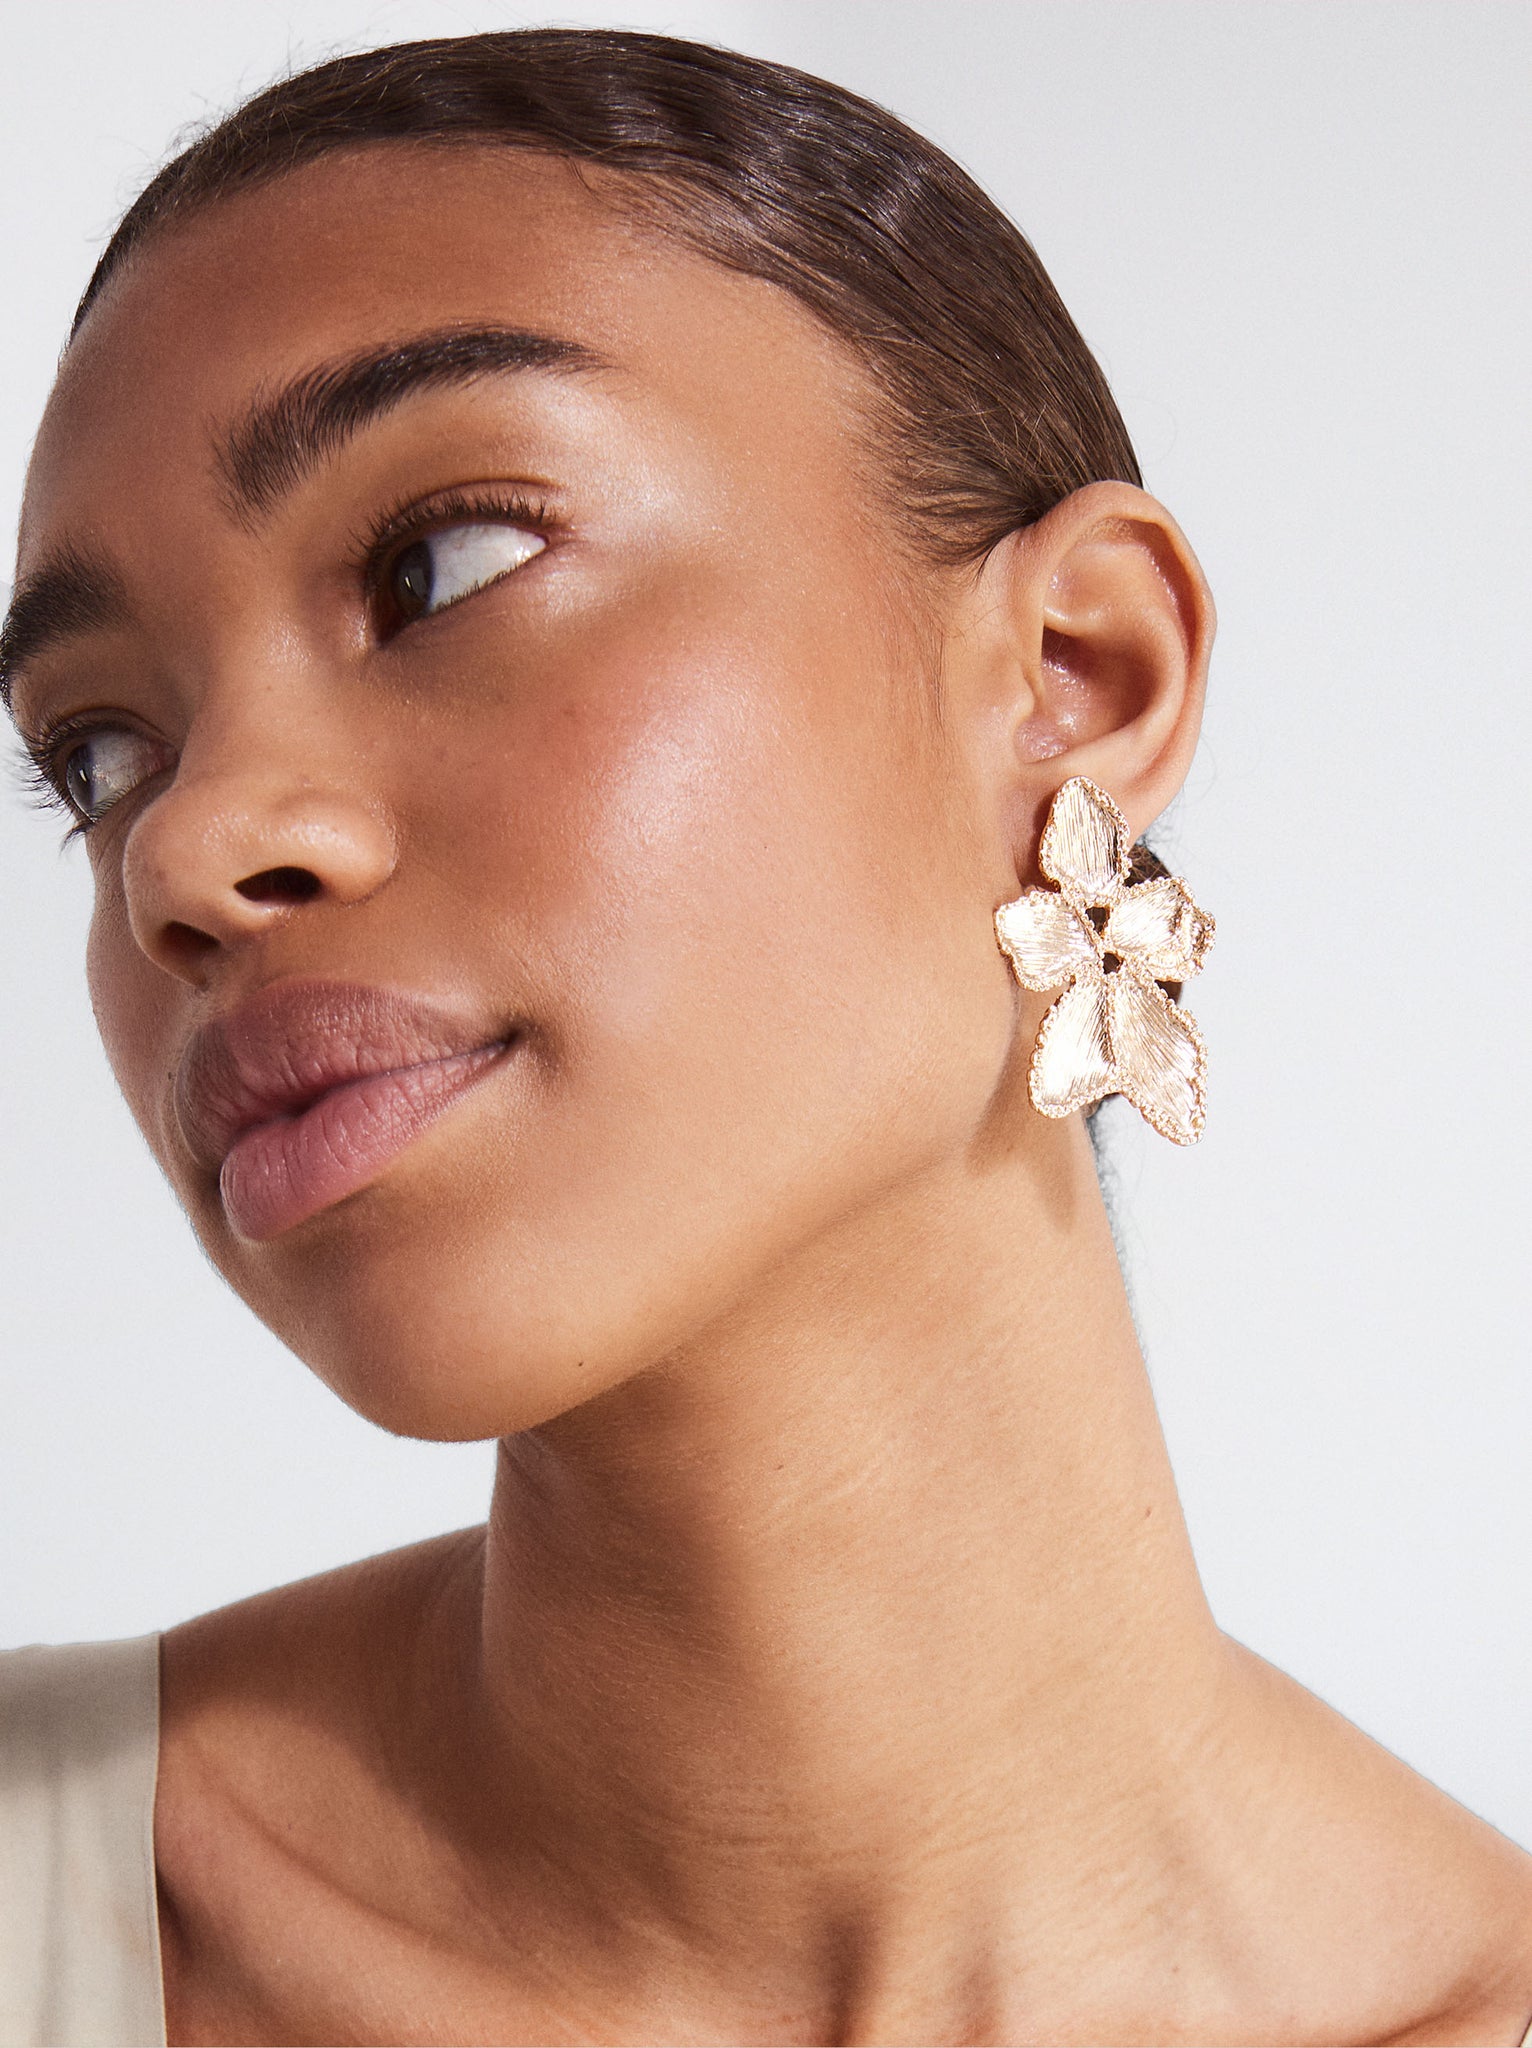 Gold-Toned Earrings With Flowers